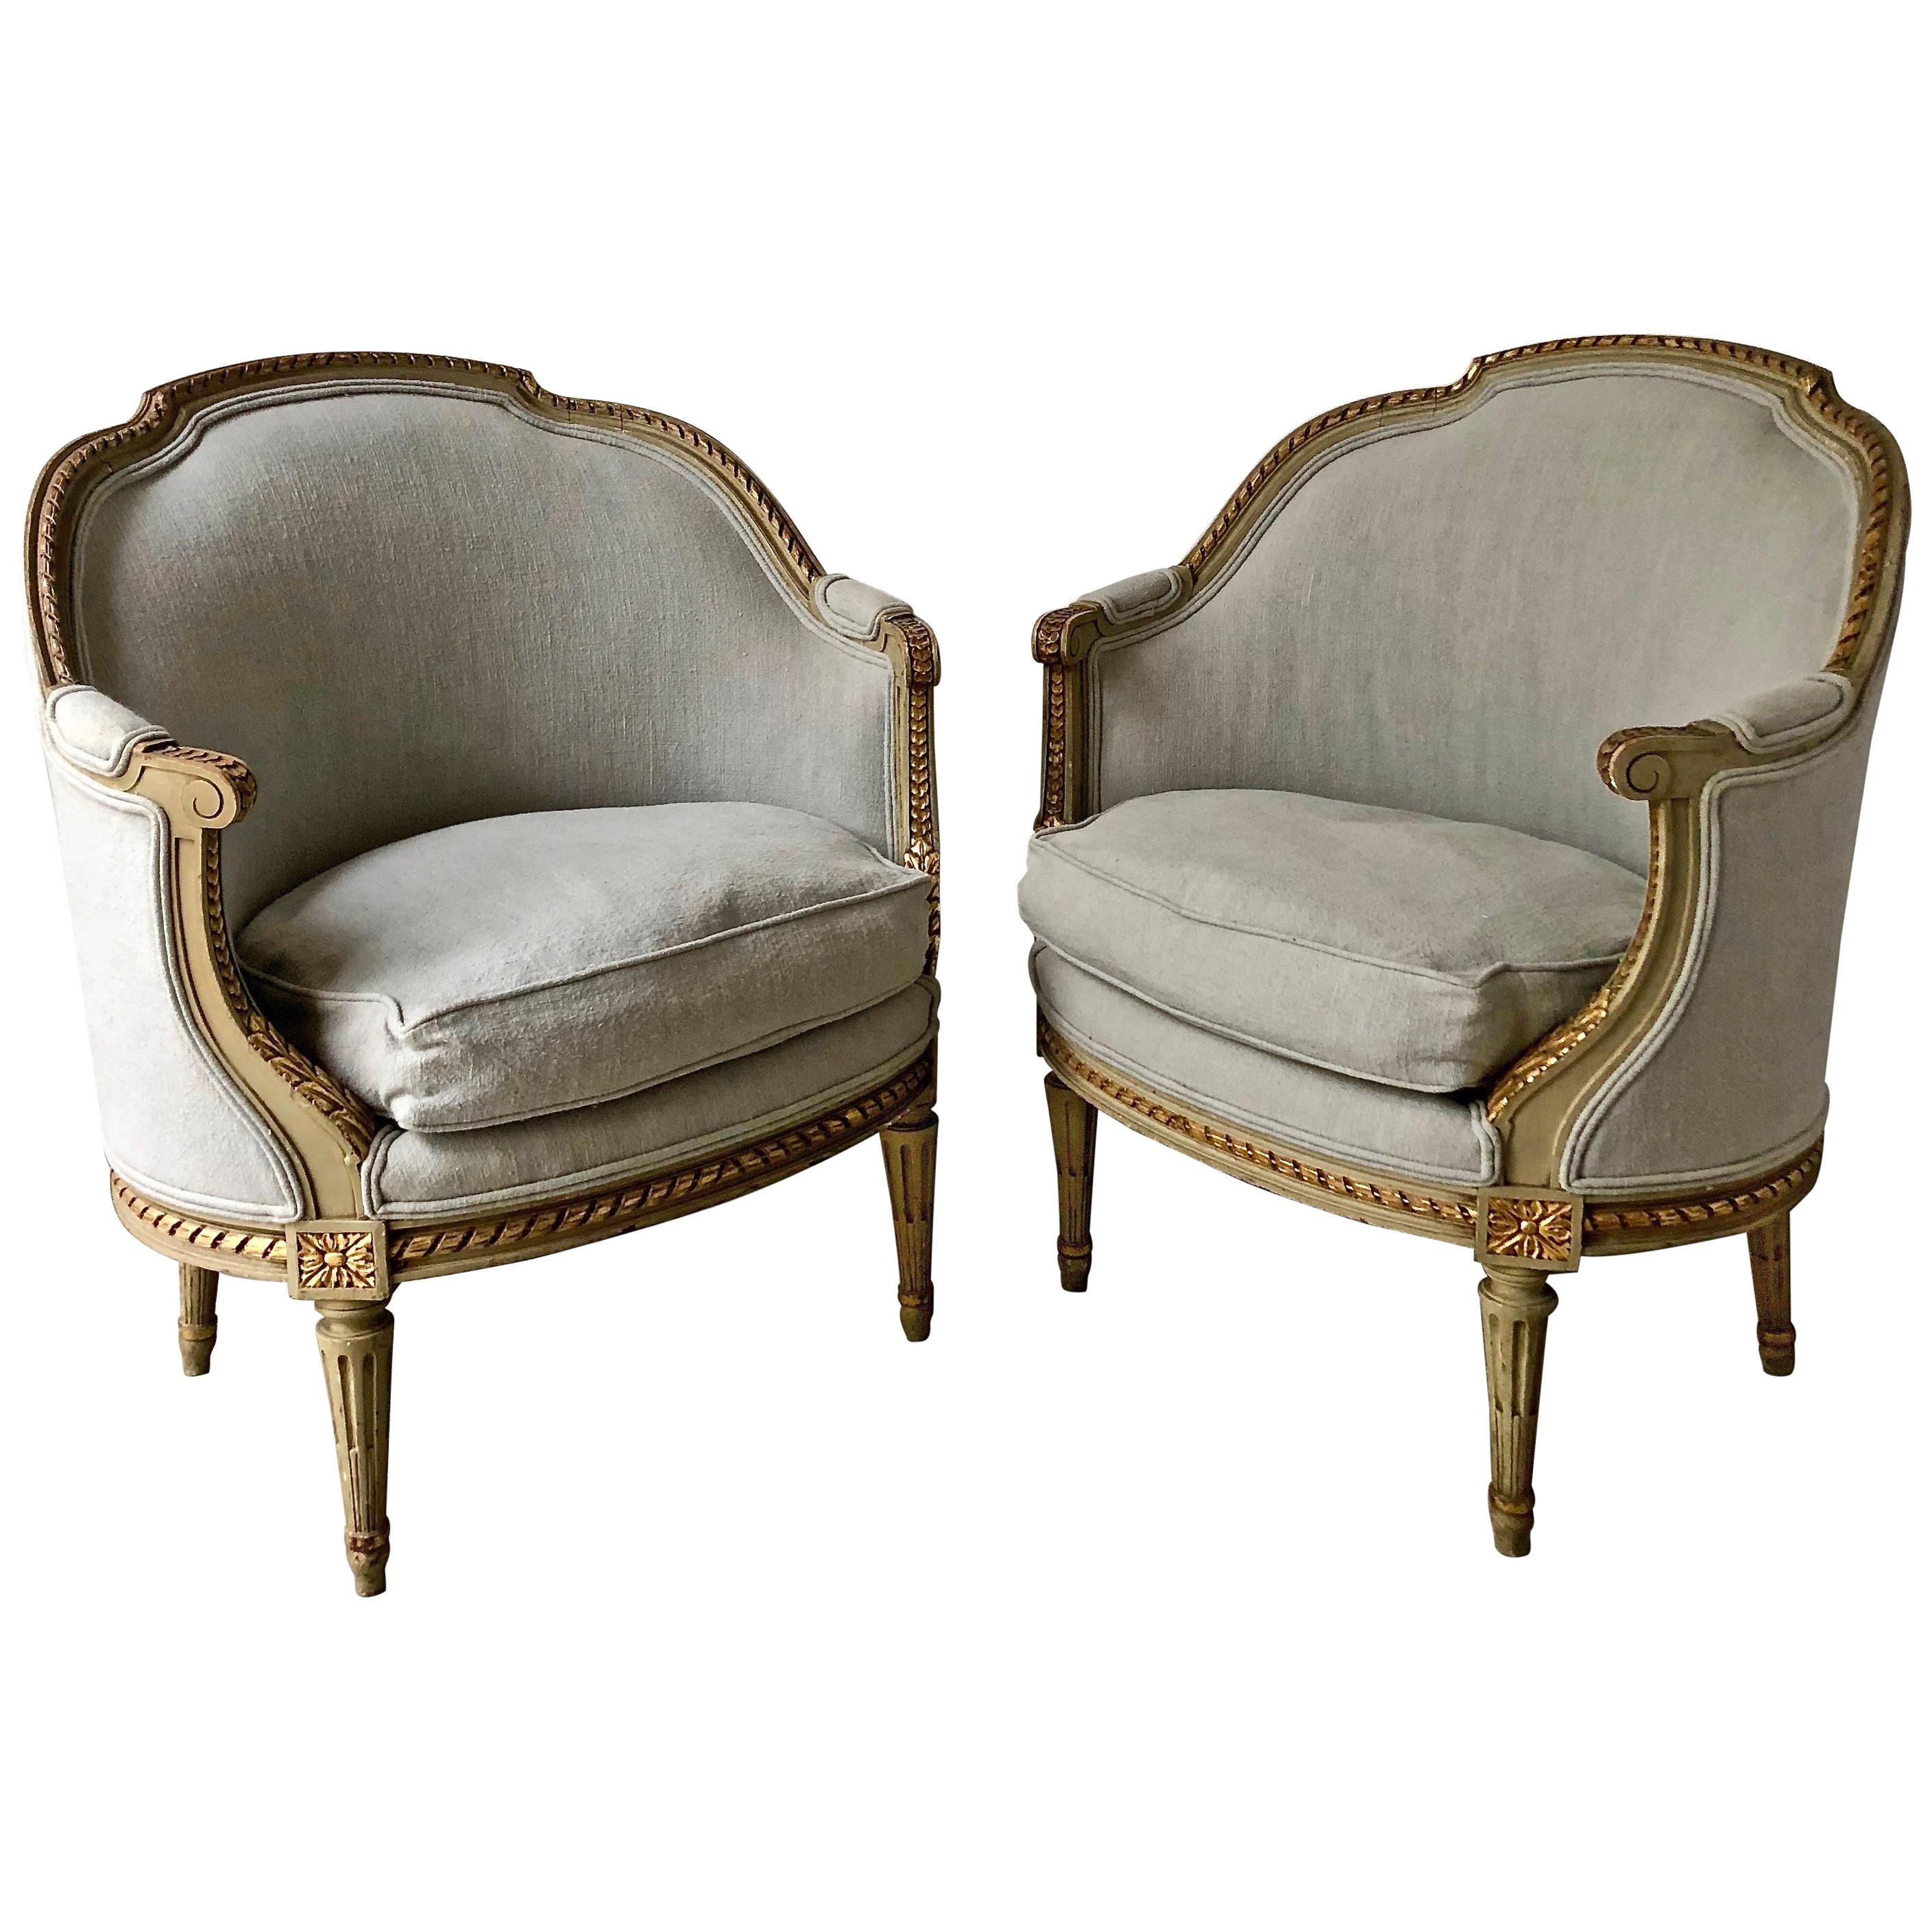 Pair of 19th Century French Louis XVI Style Bergères